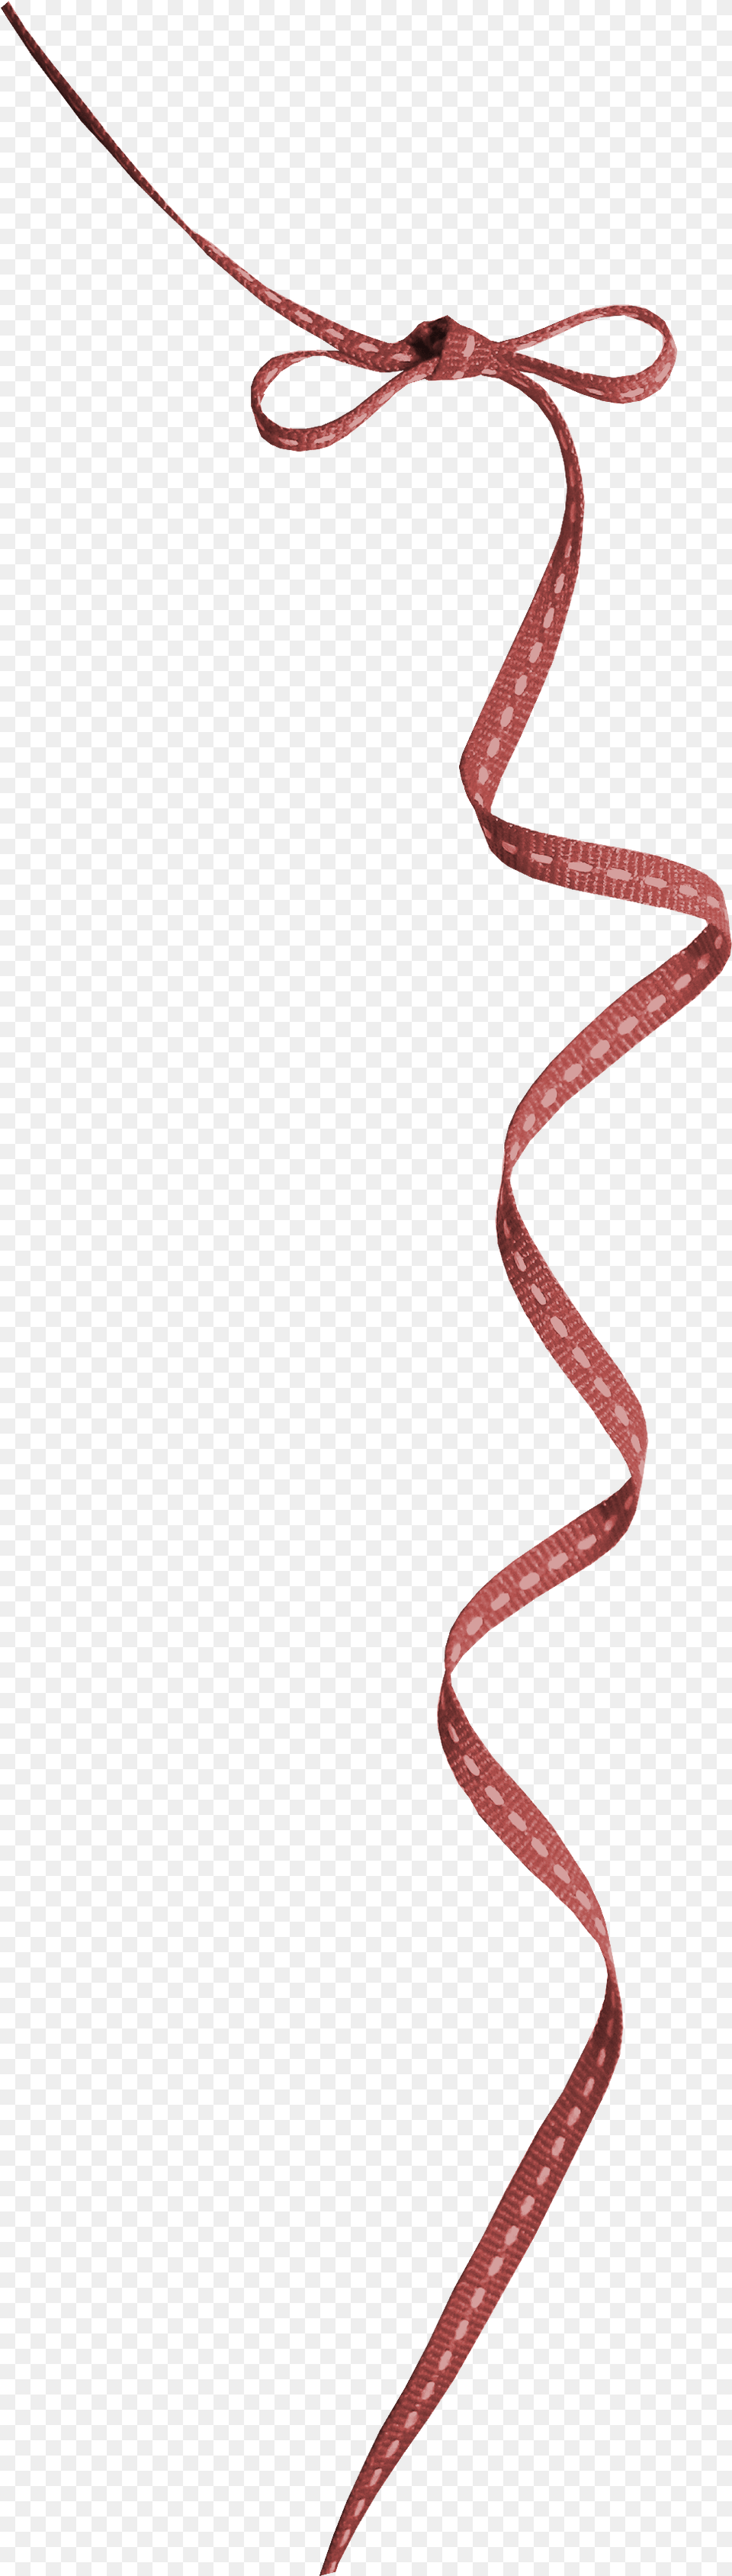 Tahi Reme Max Red Curling Ribbon, Accessories, Jewelry, Necklace Png Image